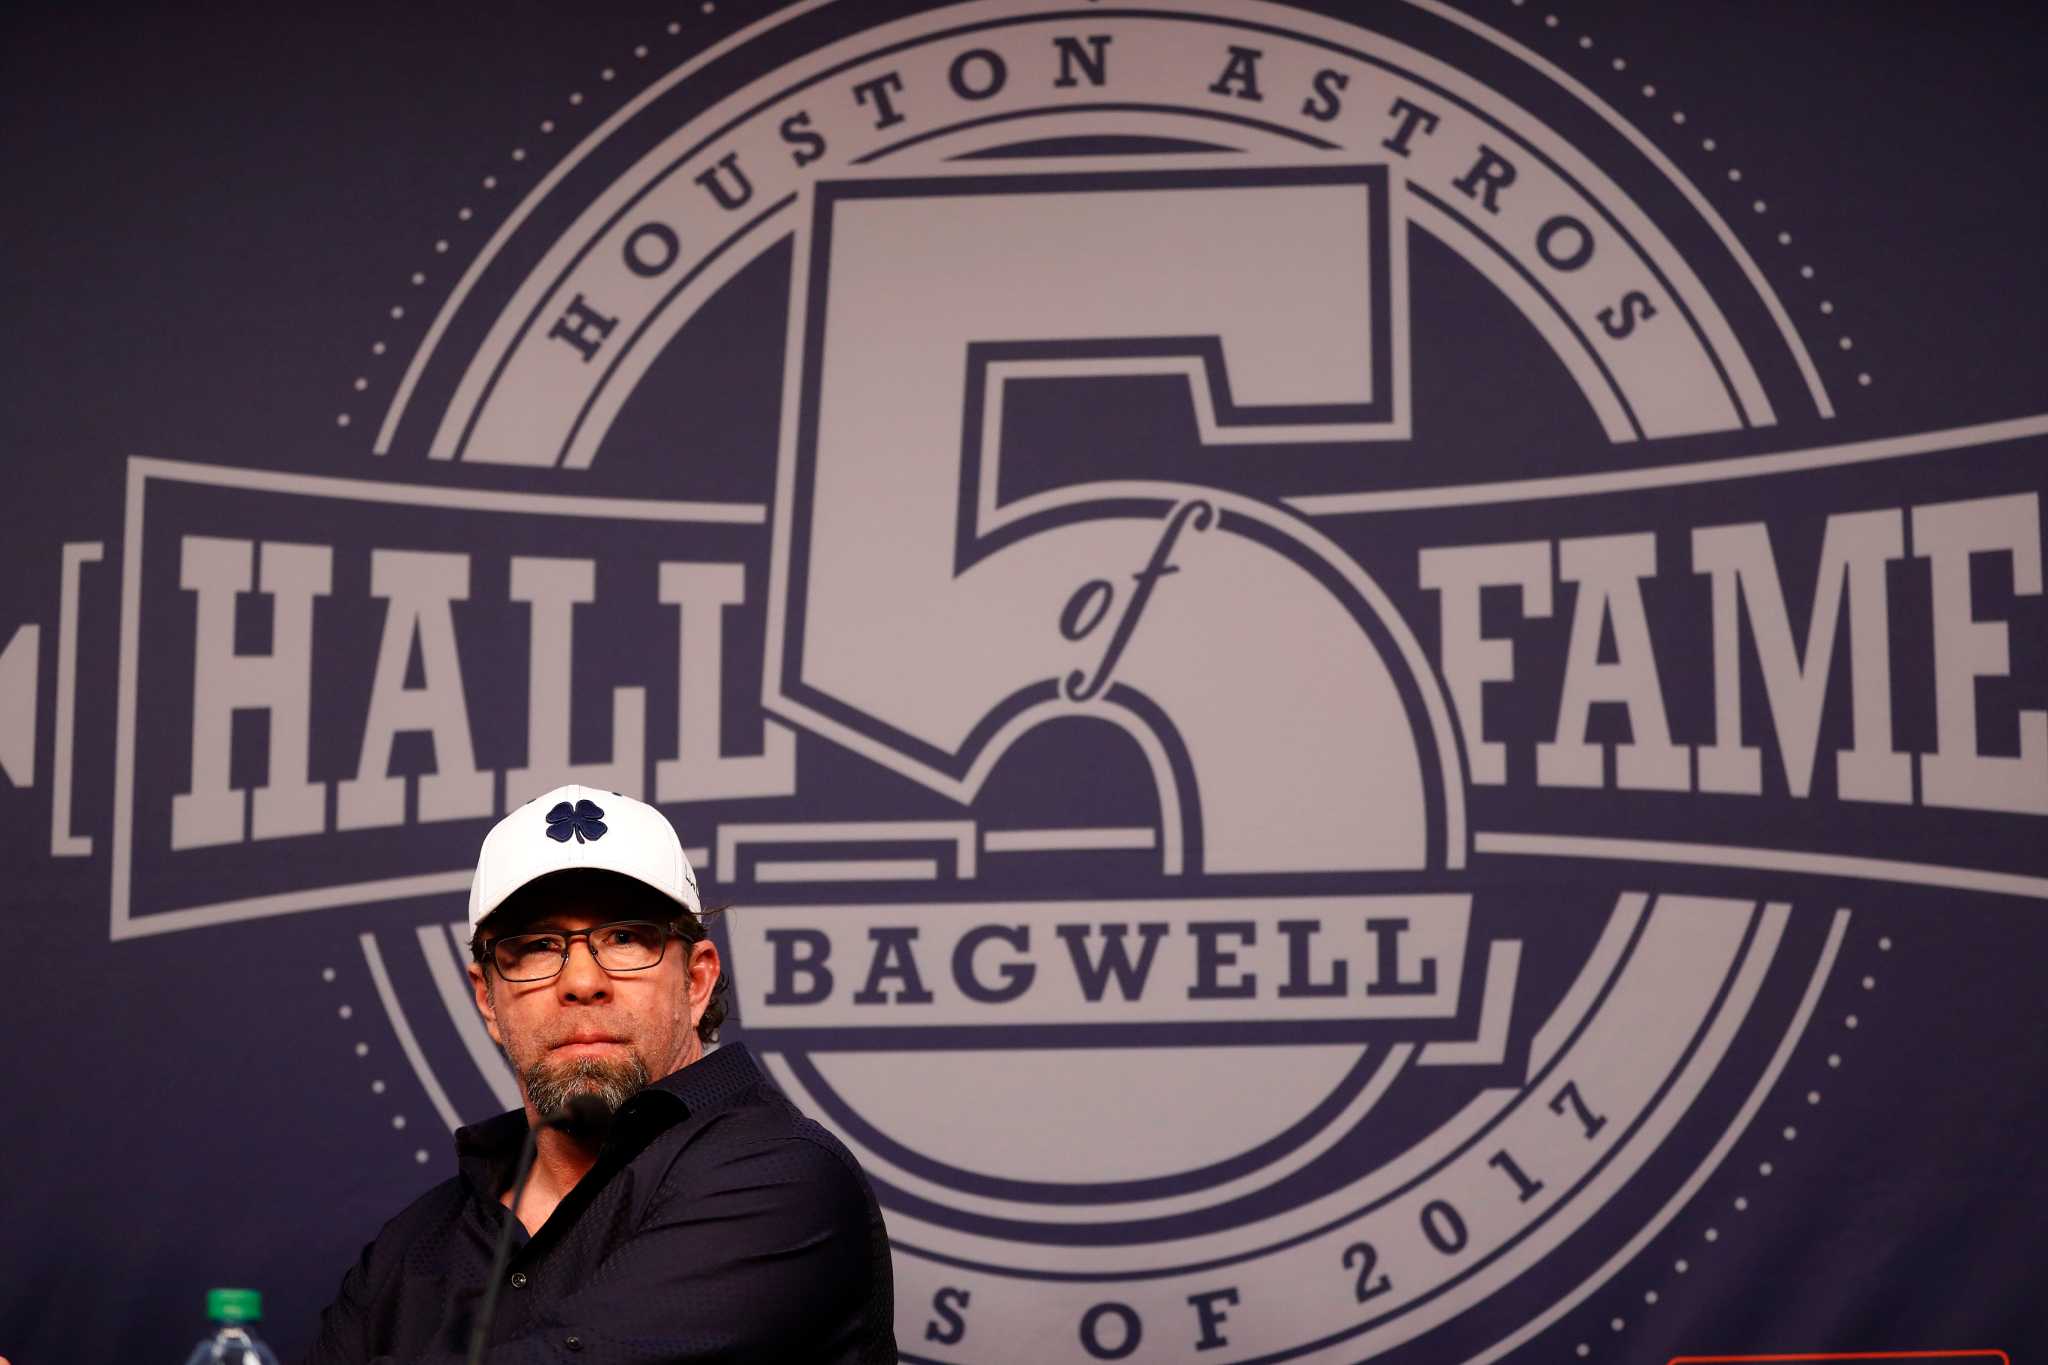 Bagwell Elected to Baseball Hall of Fame - University of Hartford Athletics